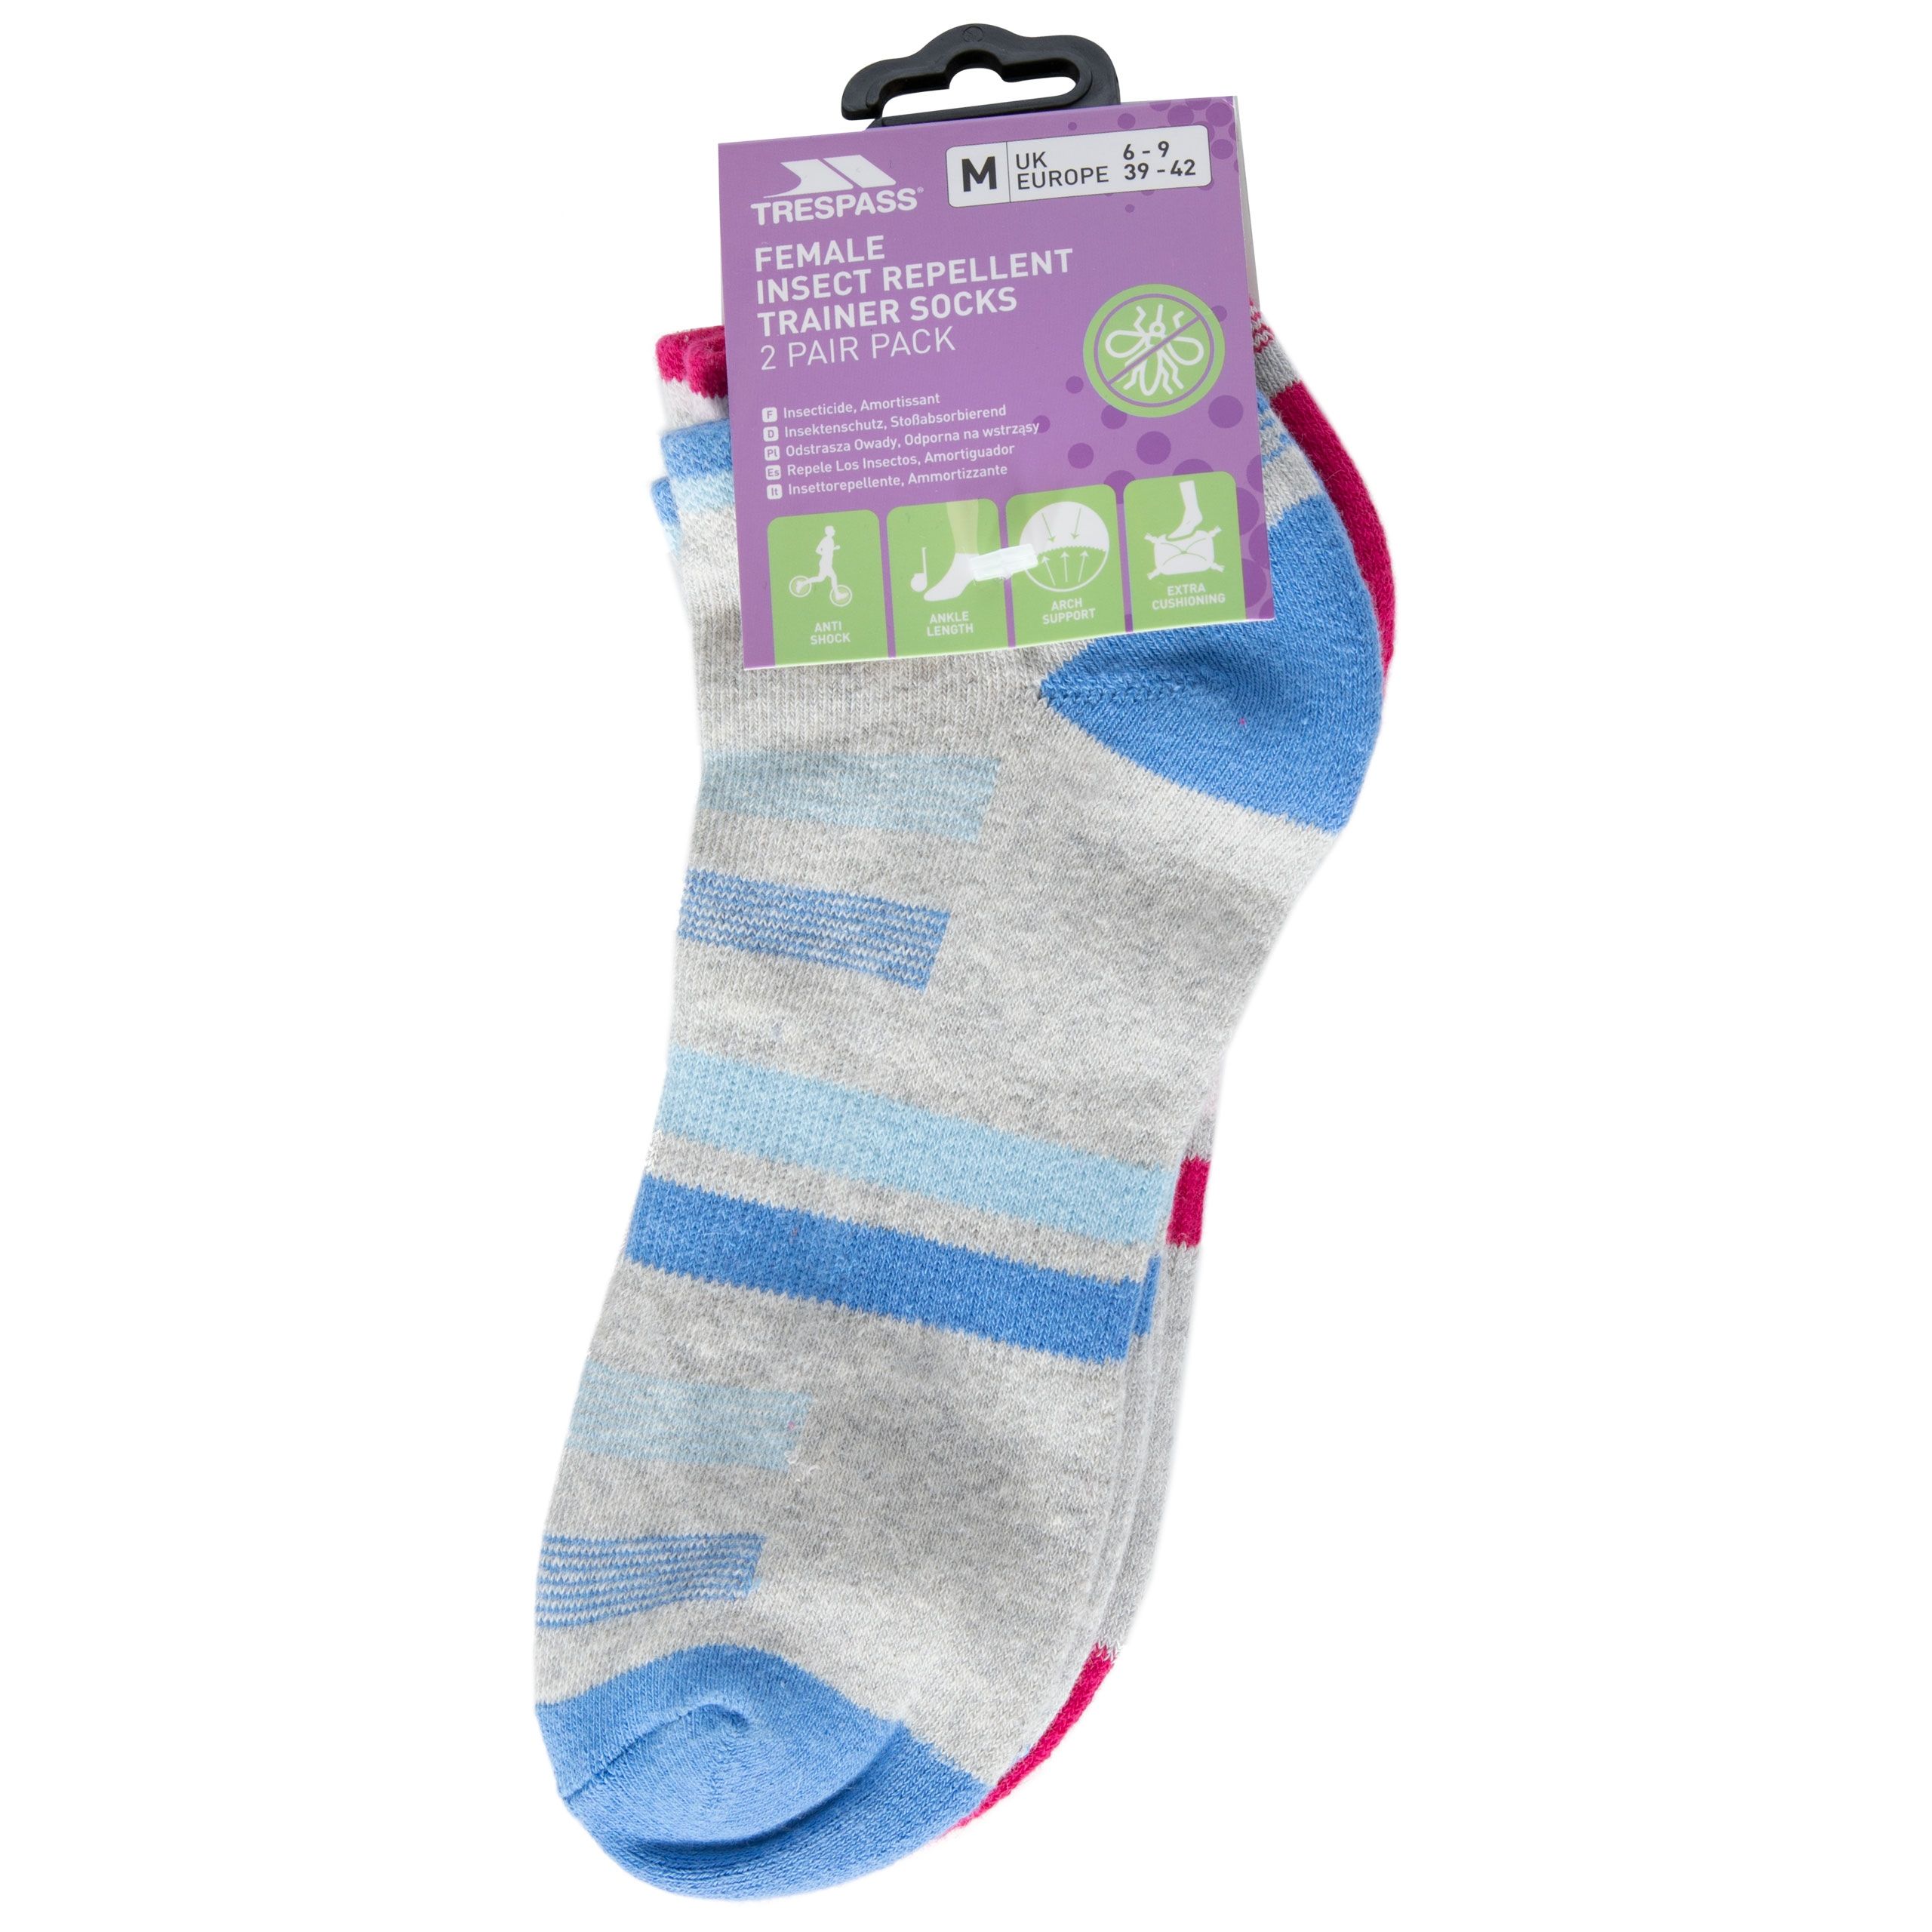 Trailing Womens Insect Repellent Trainer Socks